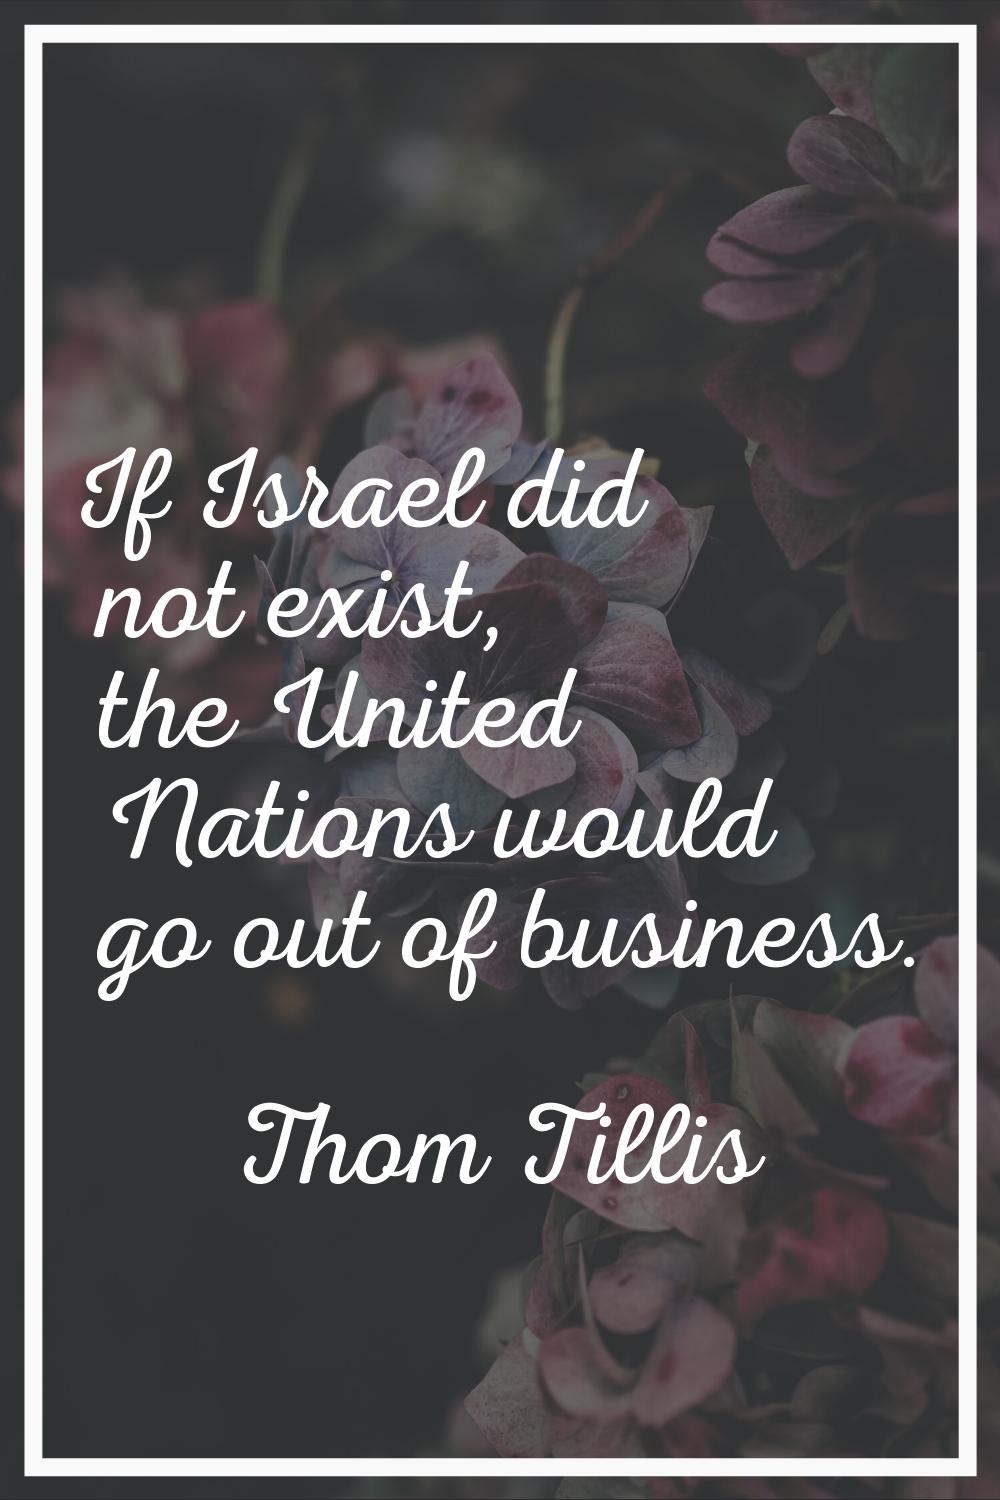 If Israel did not exist, the United Nations would go out of business.